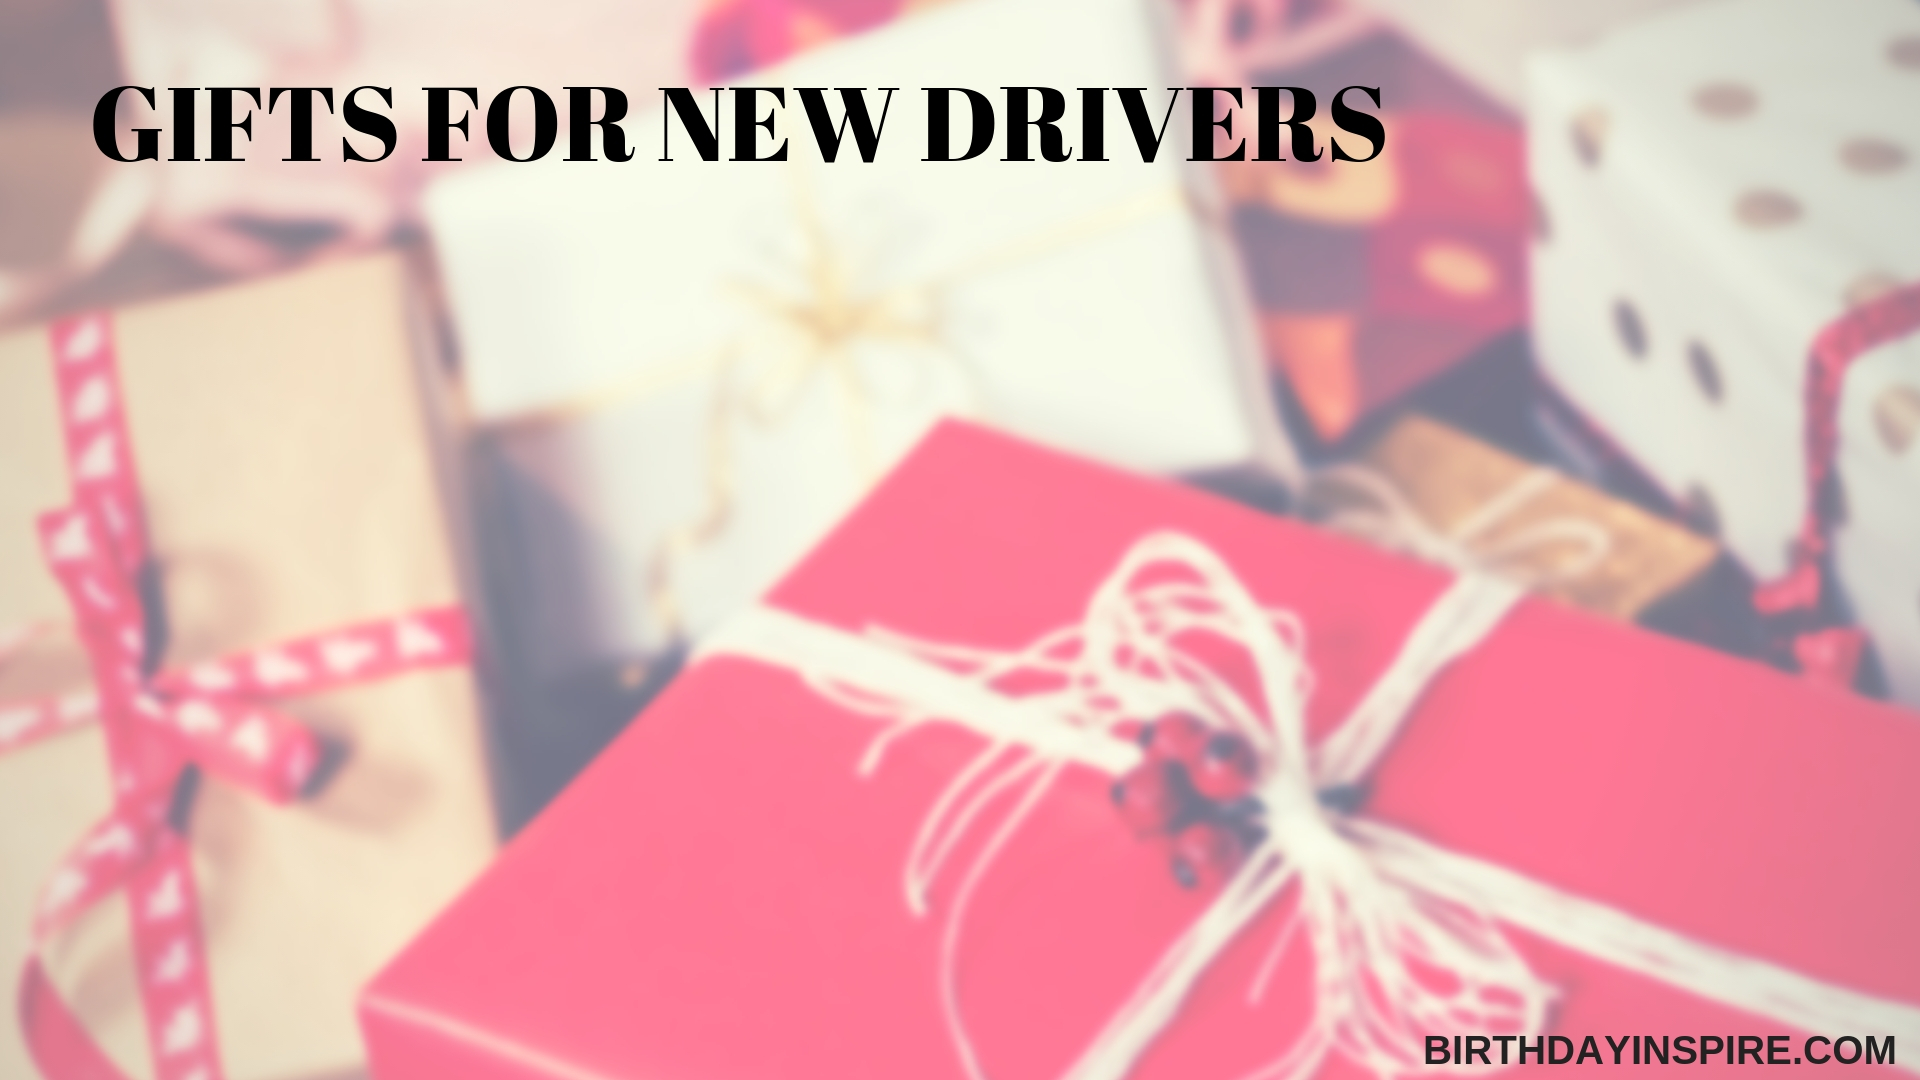 GIFTS FOR NEW DRIVERS